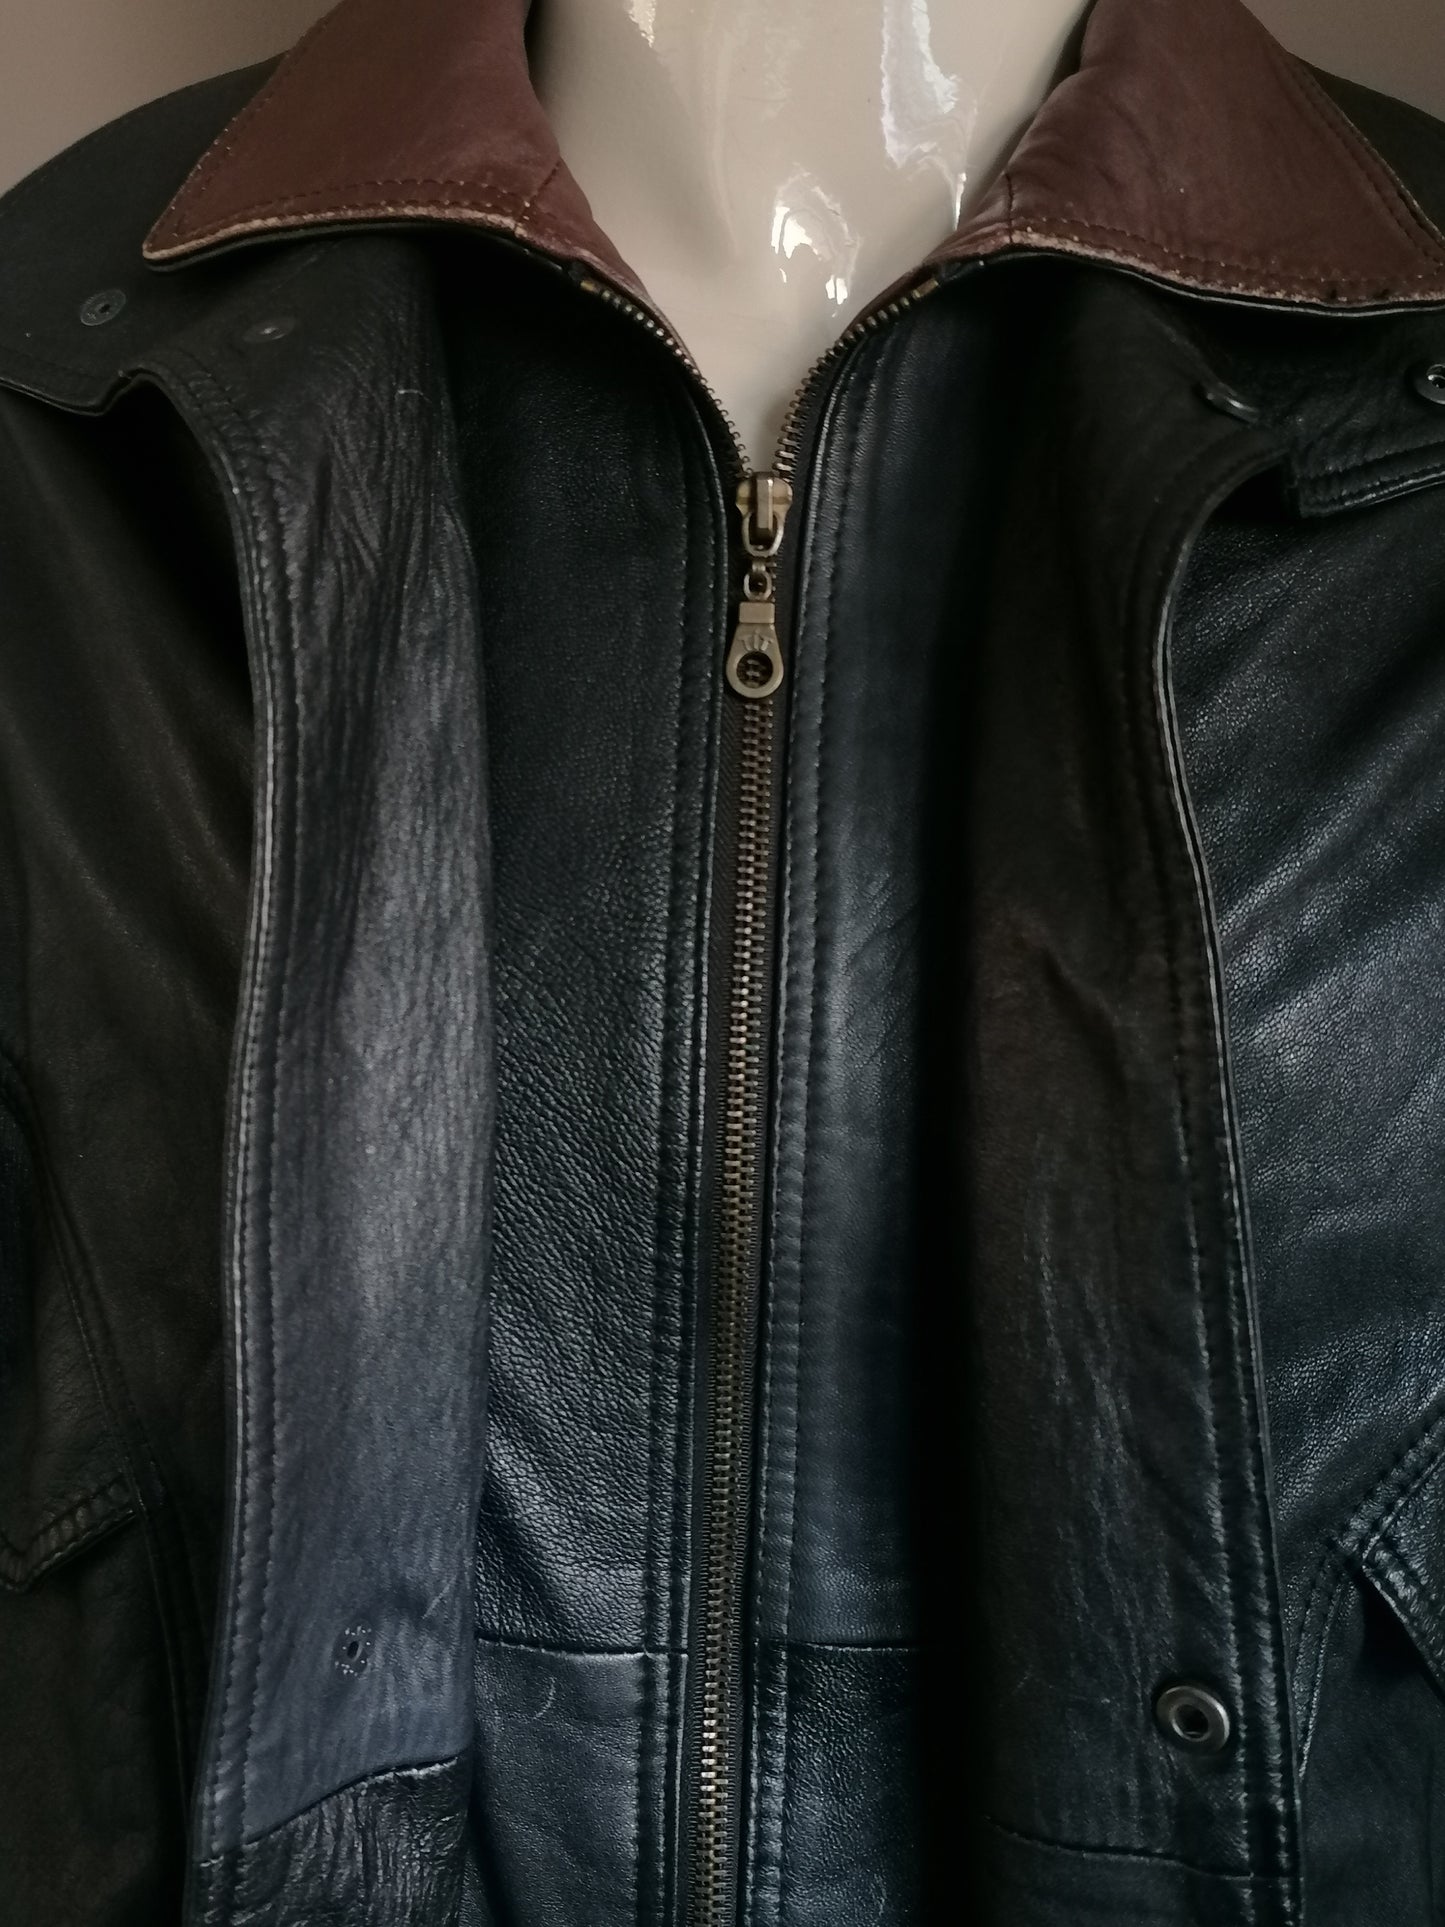 Vintage 80s-90s leather jacket with double closure. Brown black colored. Size L / XL.